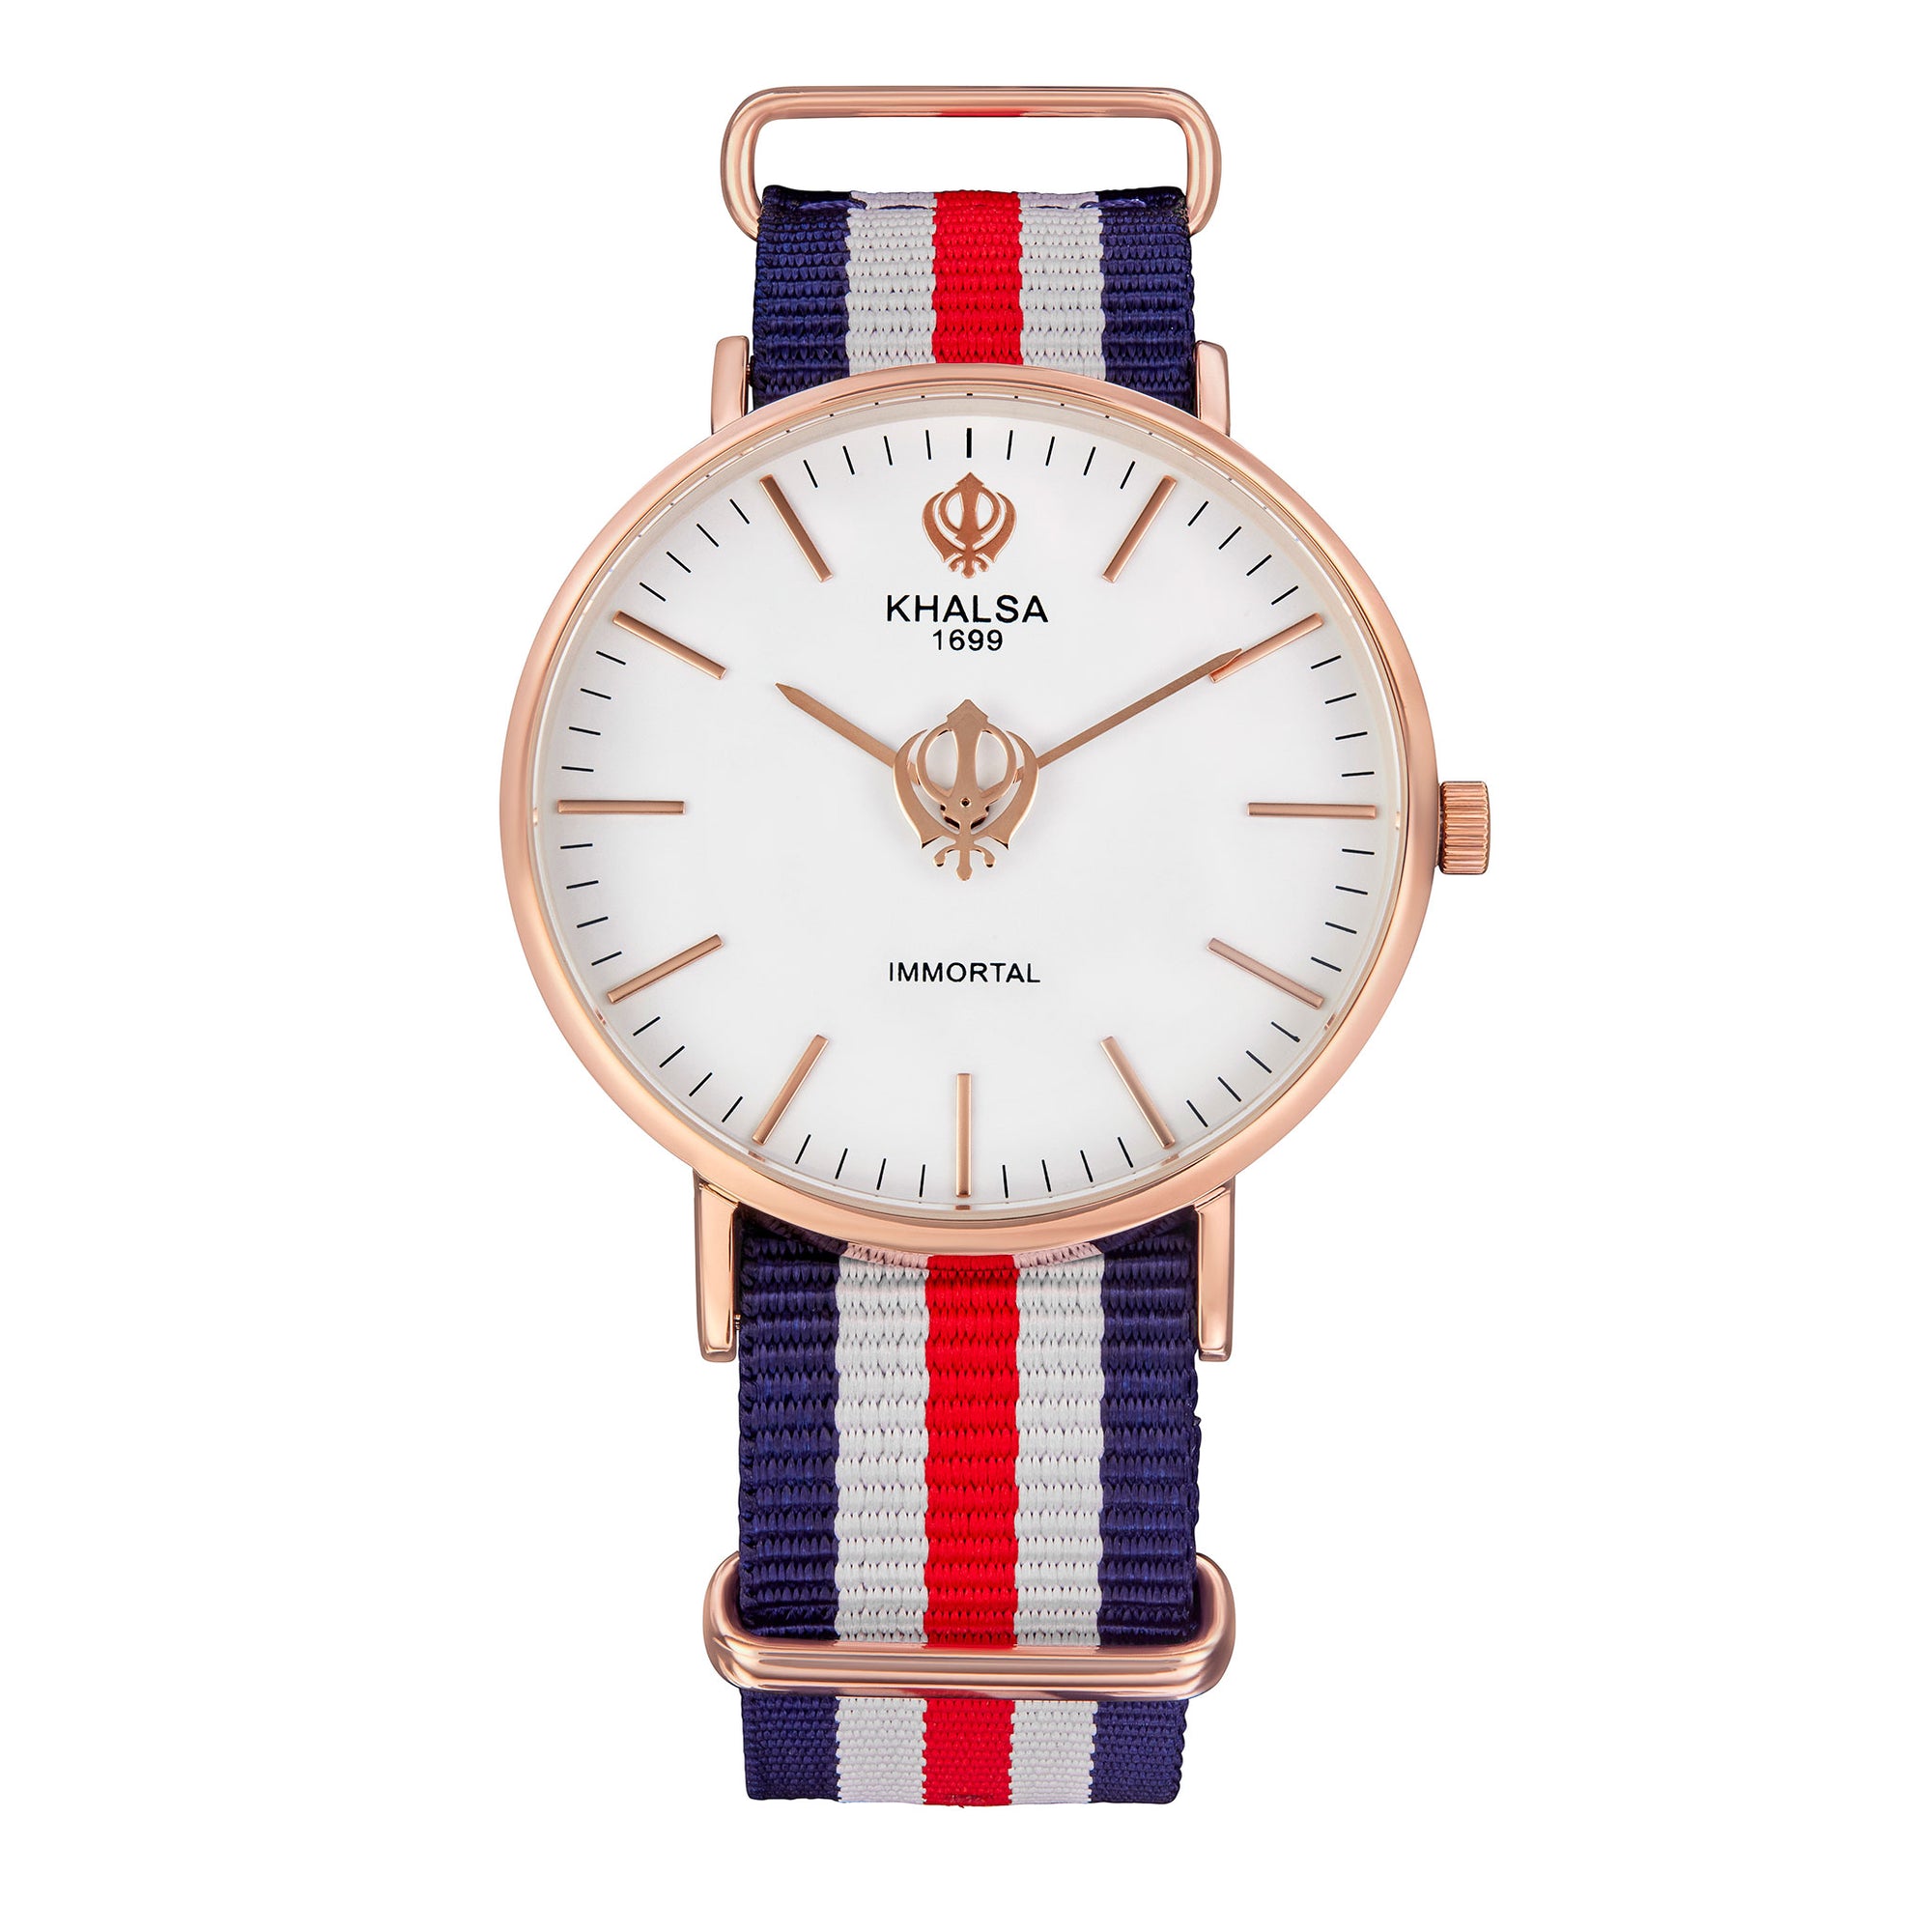 House of Khalsa IMMORTAL Gold White Sikh Watch with Khanda Symbol, Sun Dial and Colorful Strap - Elegant and Stylish